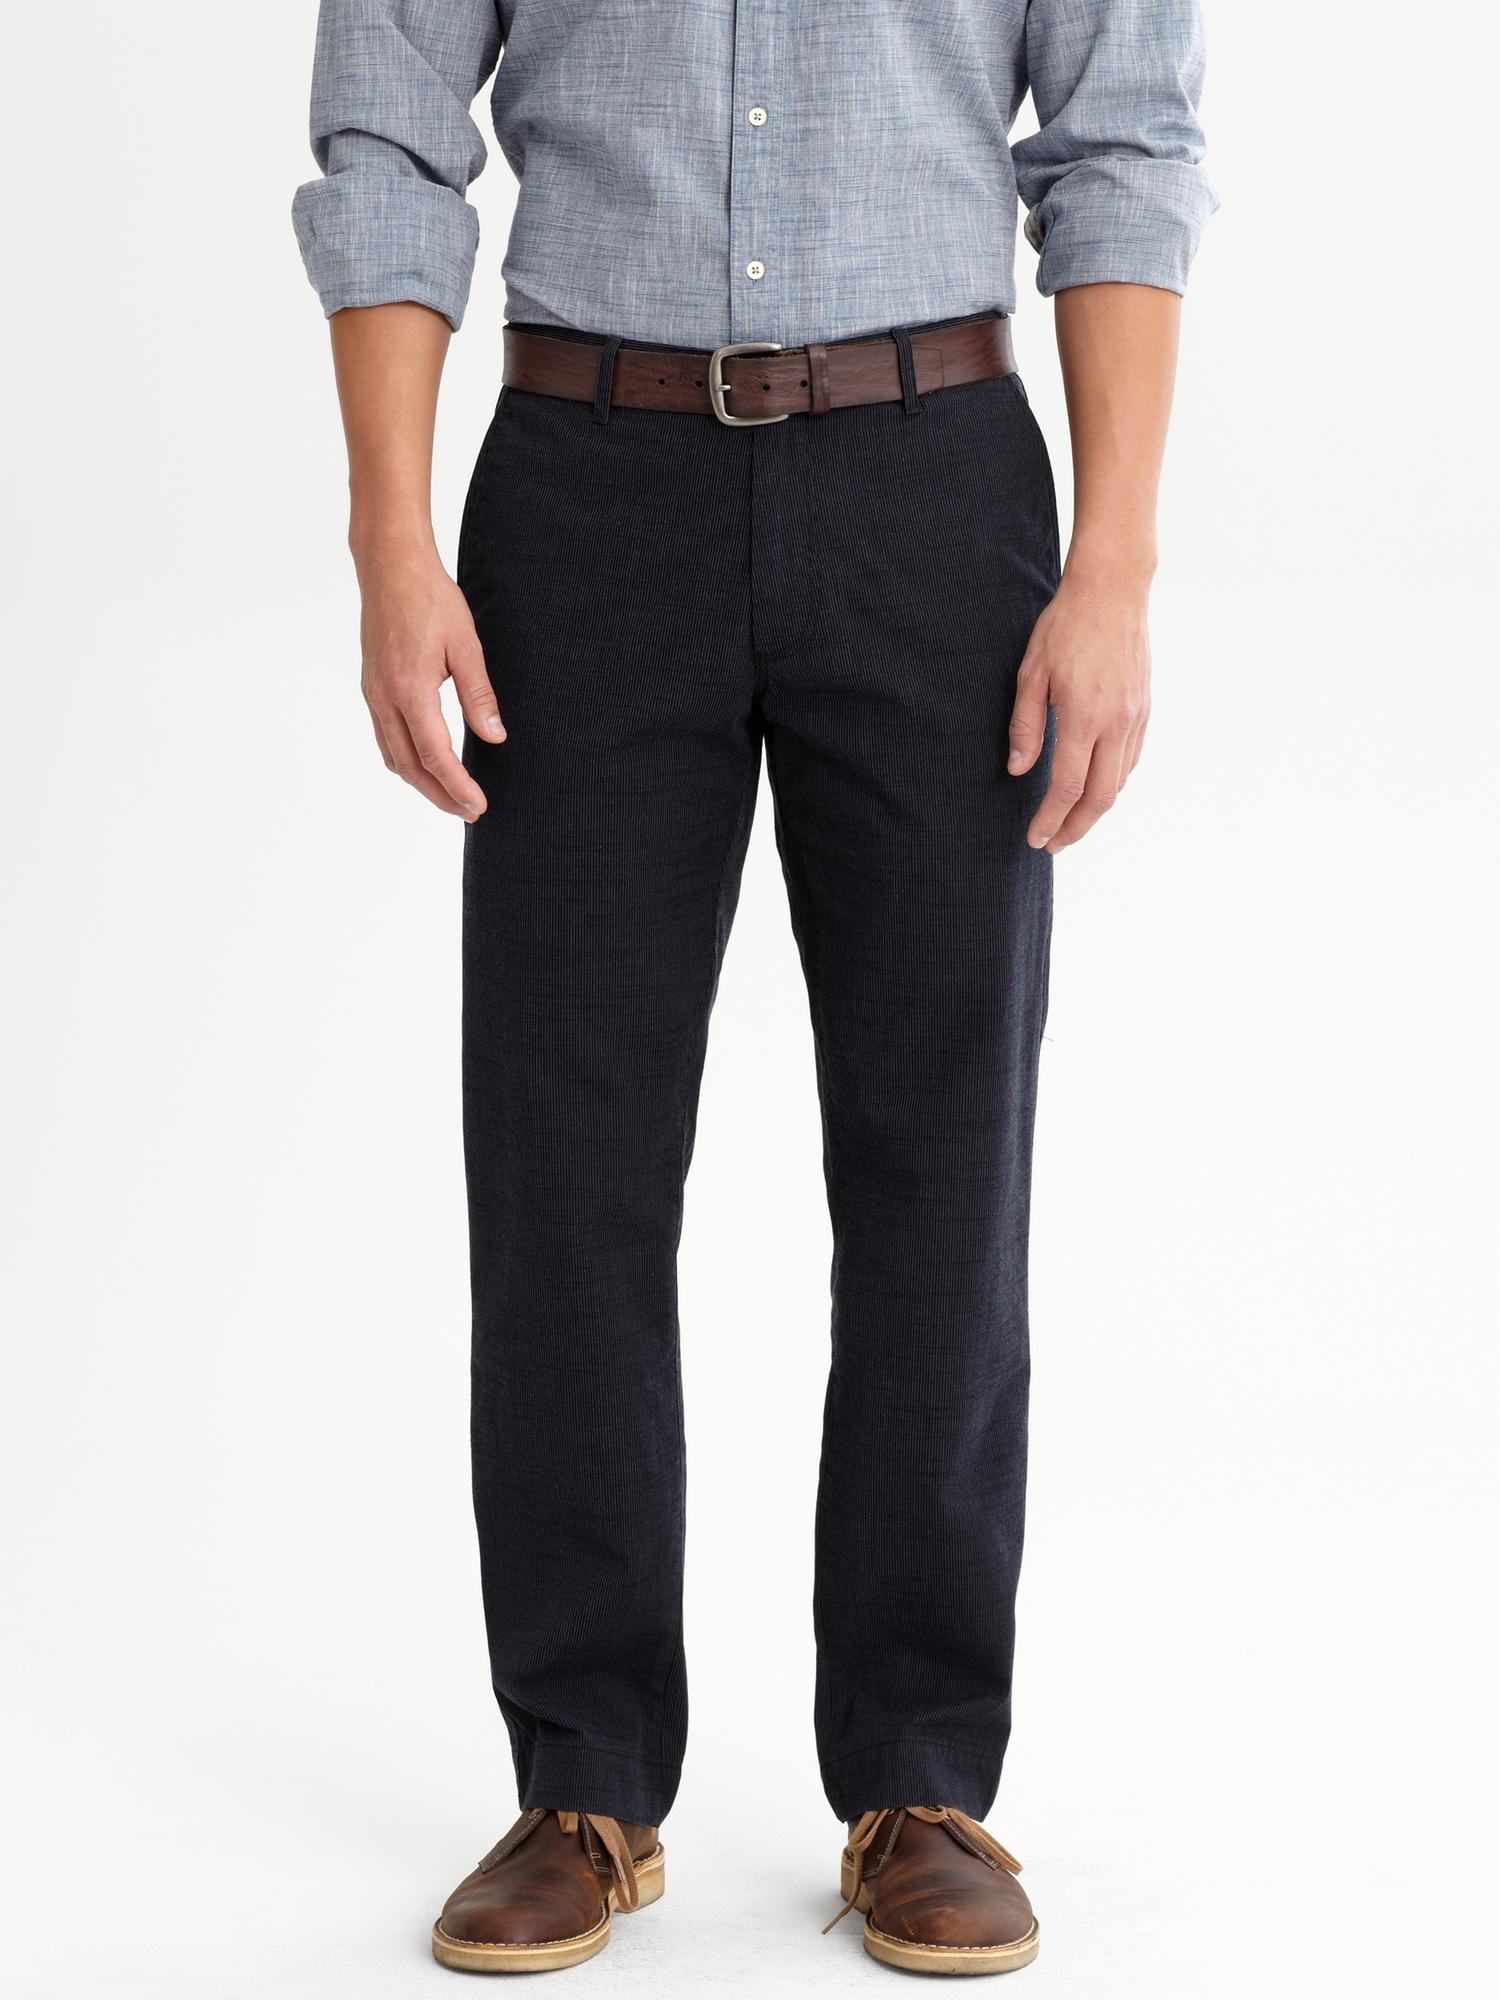 Straight fit micro-stripe pant